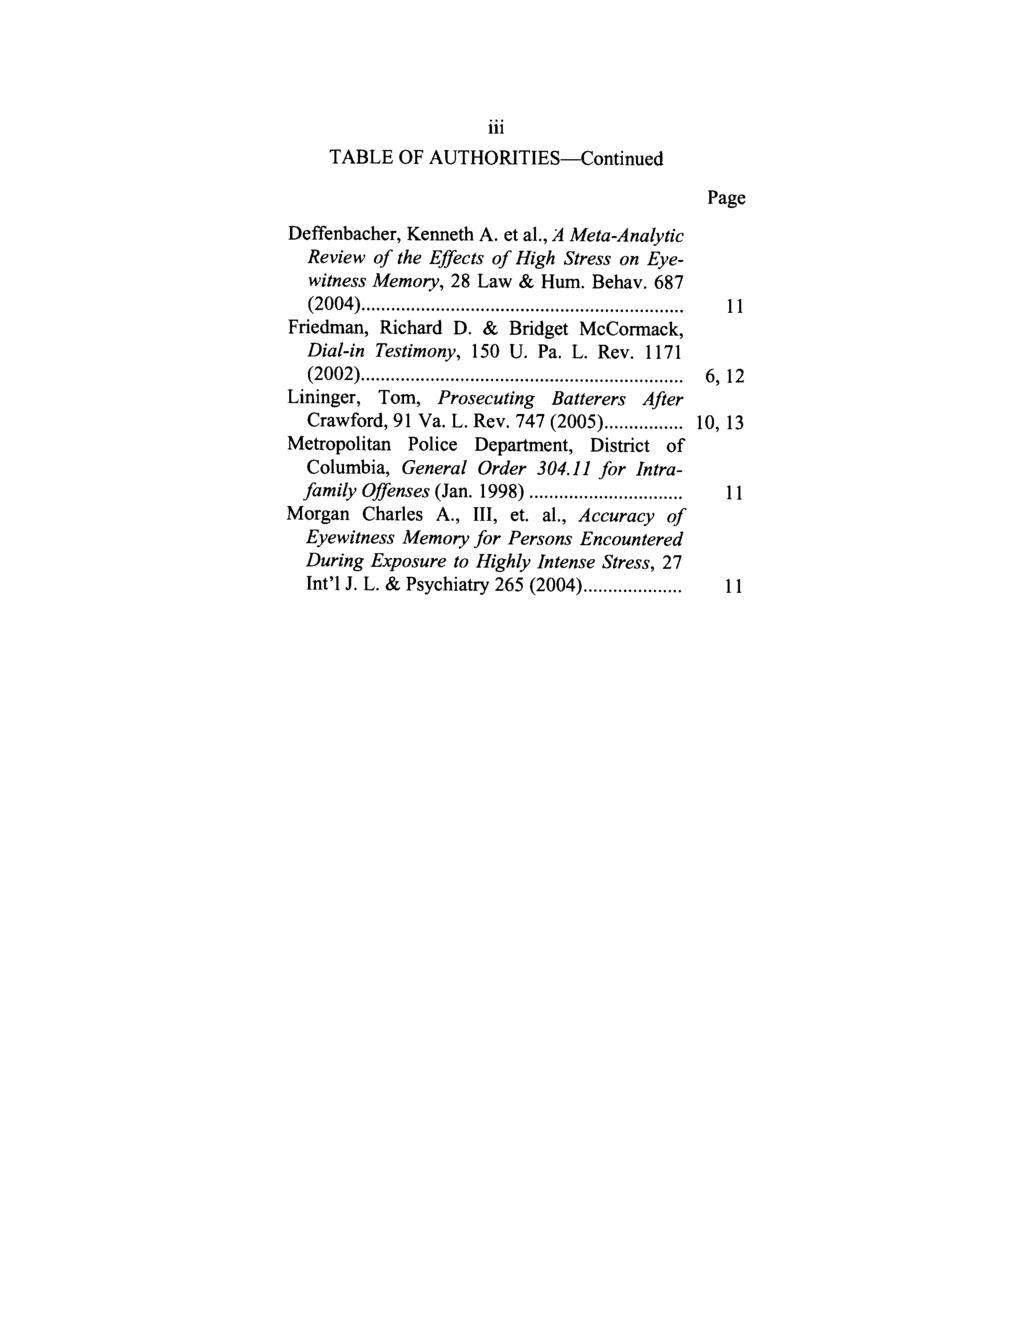 111 TABLE OF AUTHORITIES--Continued Page Deffenbacher, Kenneth A. et al., A Meta-Analytic Review of the Effects of High Stress on Eyewitness Memory, 28 Law & Hum. Behav. 687 (2004).